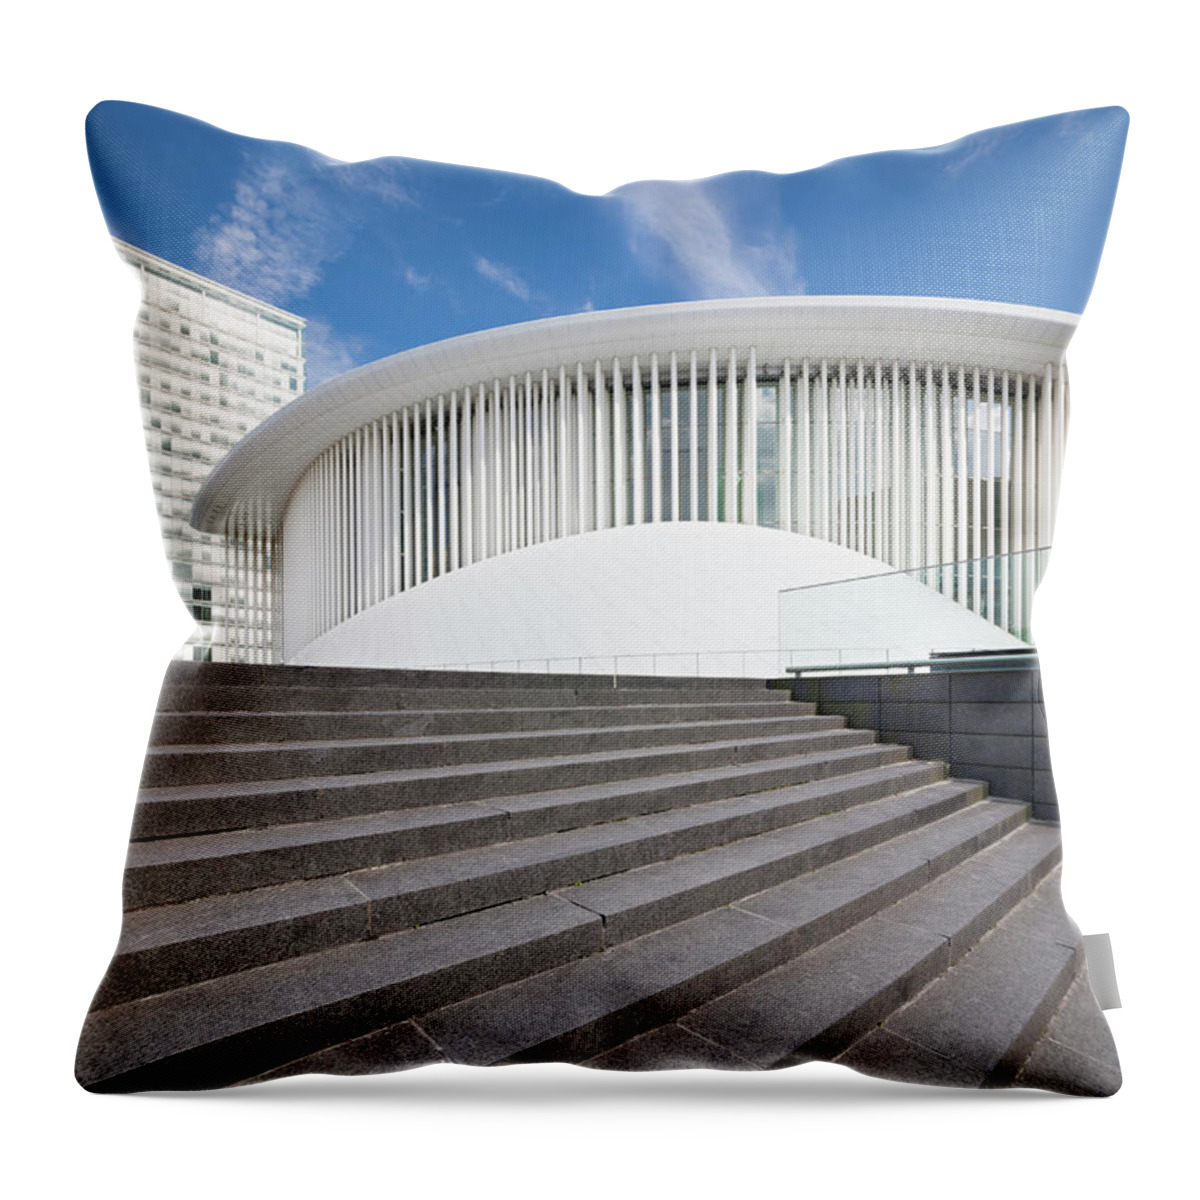 Steps Throw Pillow featuring the photograph Philharmonie Luxembourg by Jorg Greuel